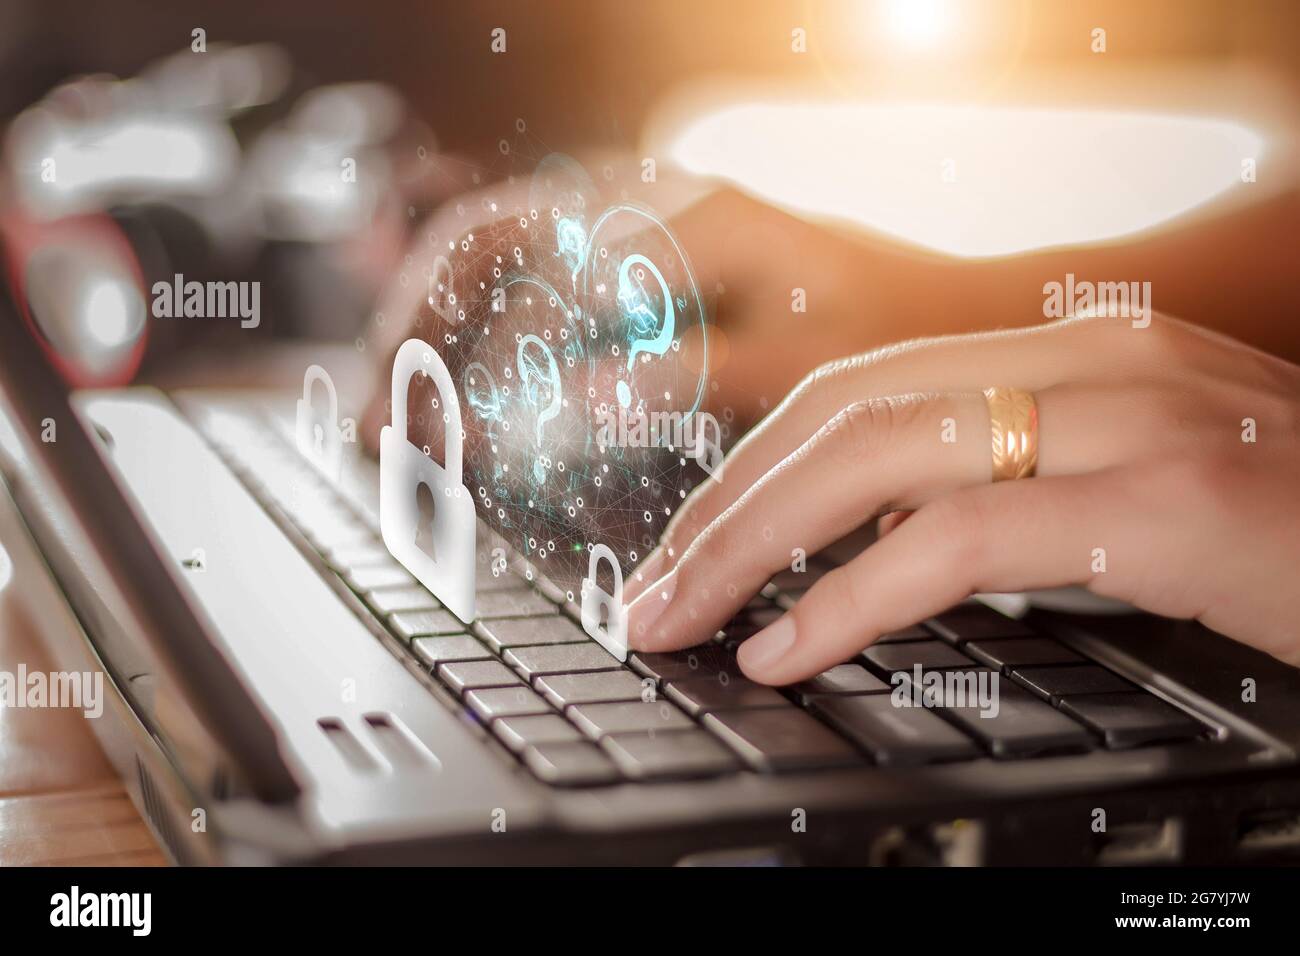 Internet and network technology business concept A business man working on a laptop in the office select the security icon on the display virtual Stock Photo